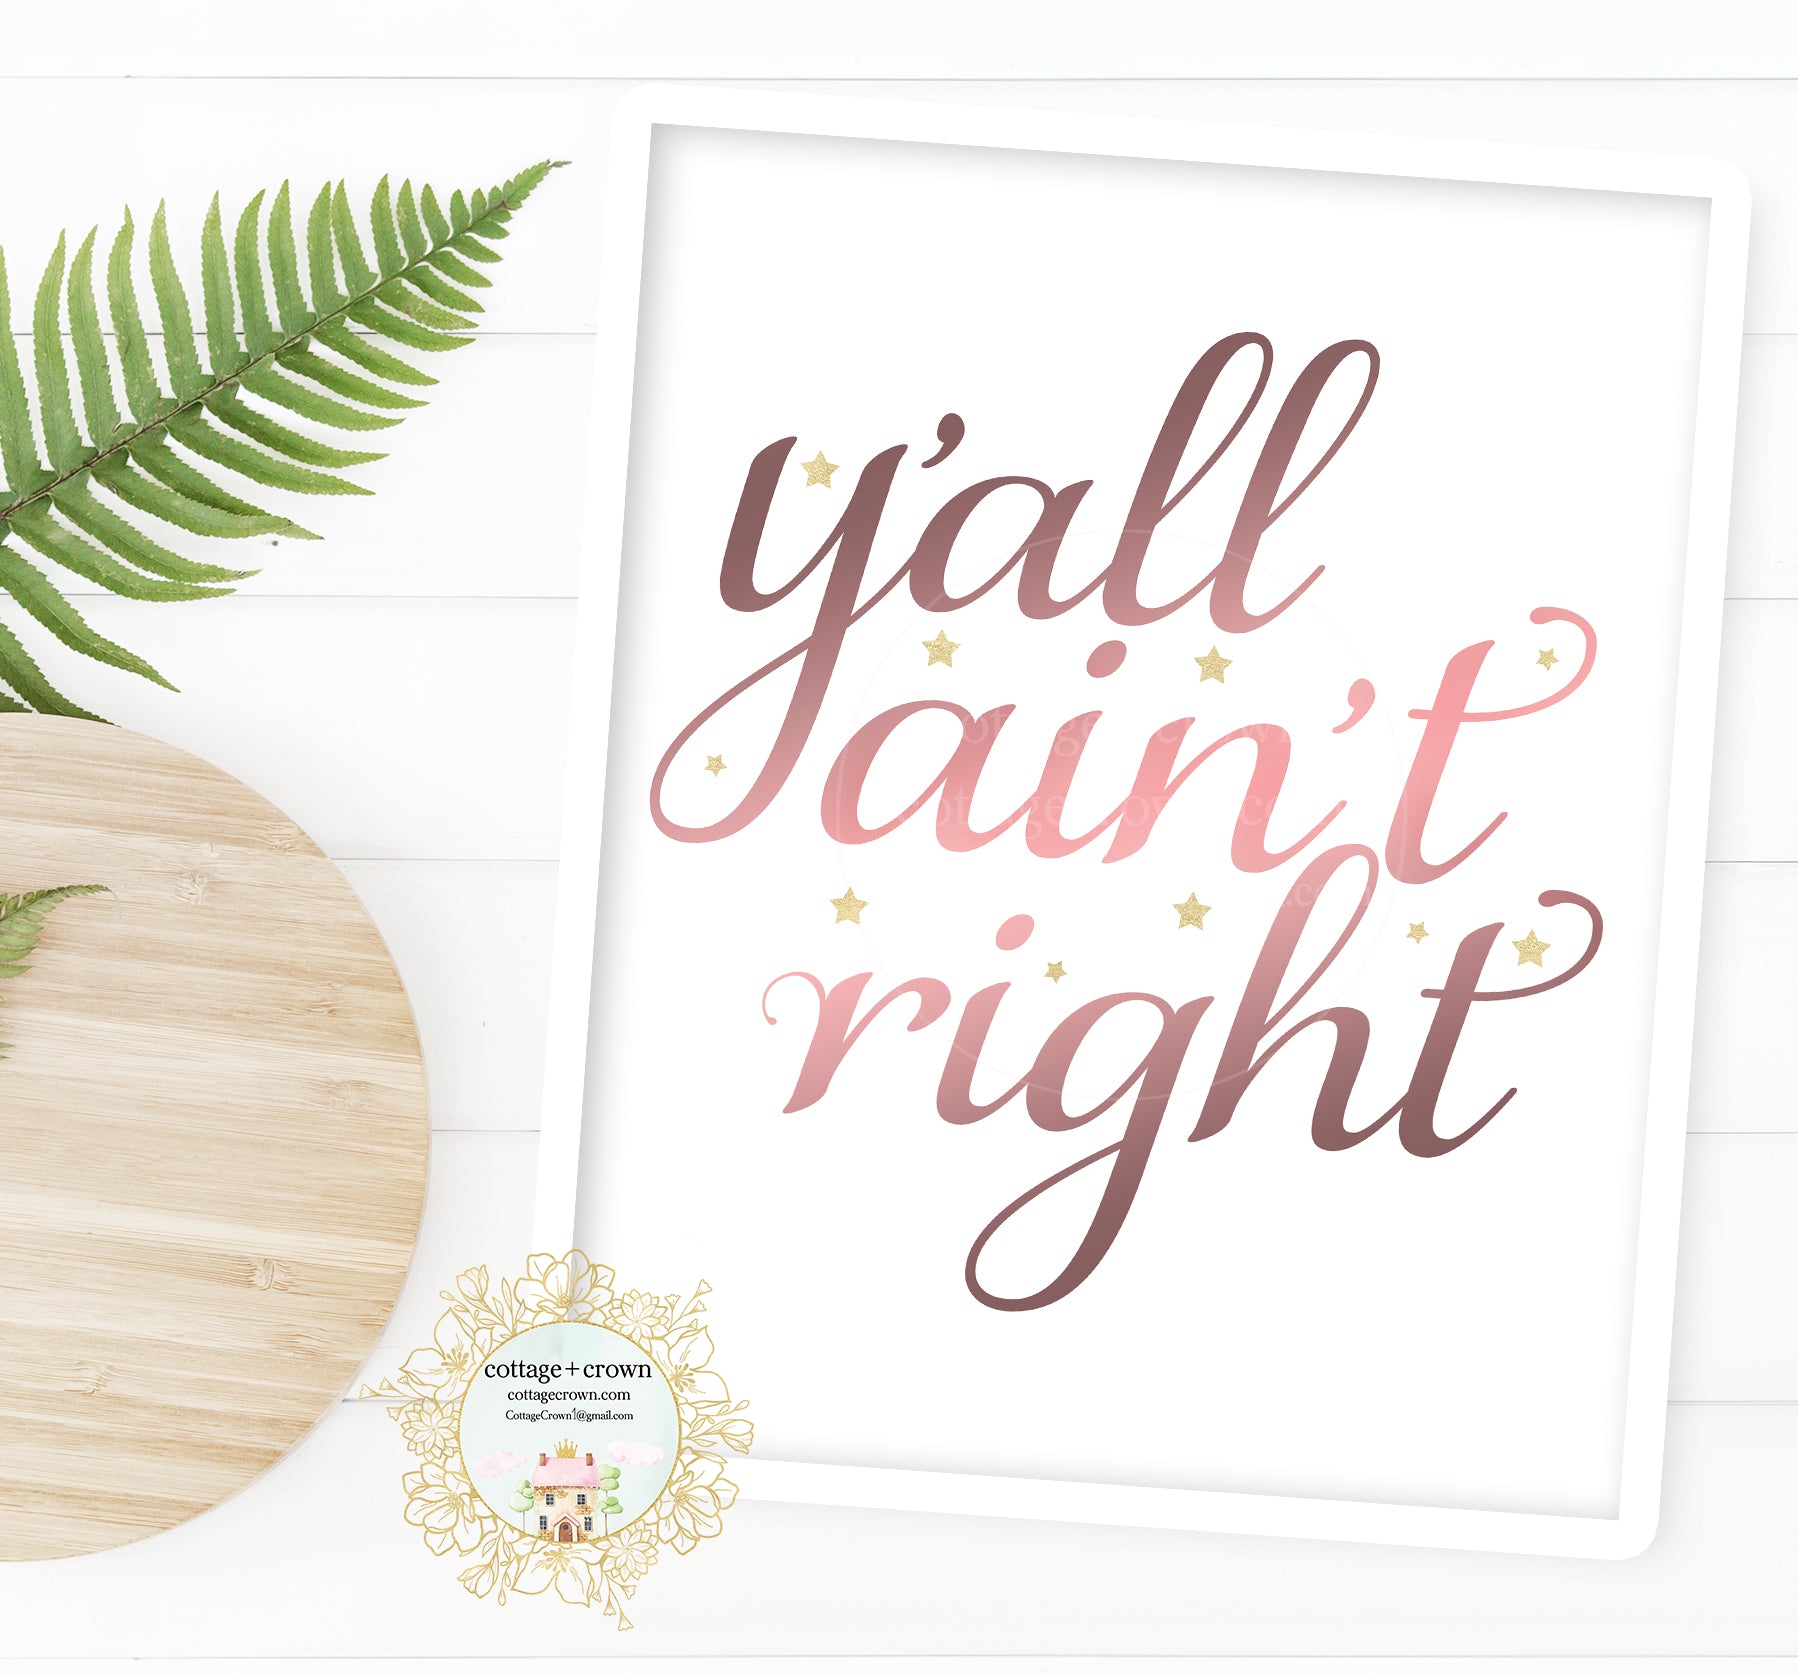 Y'all Ain't Right Preppy Decor - Home + Office Wall Art Print